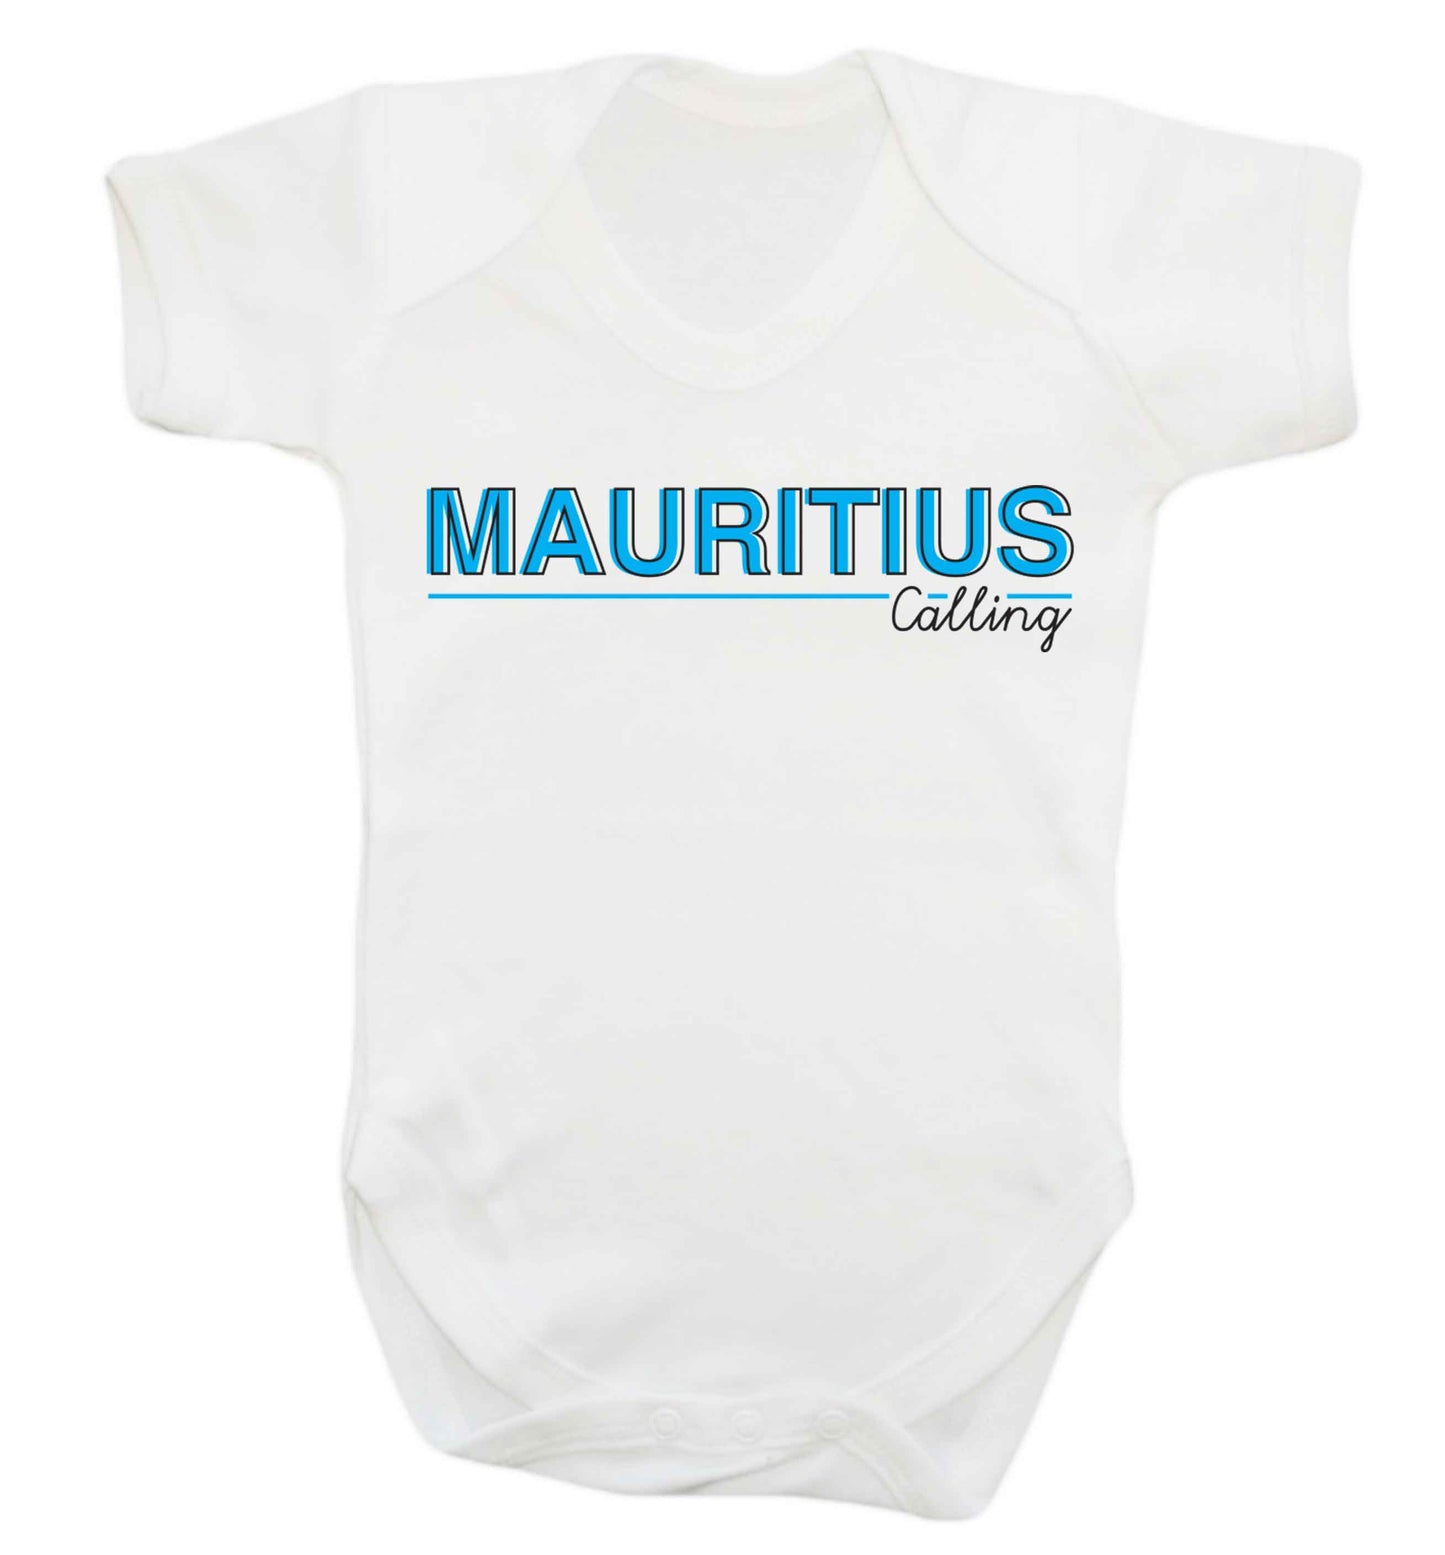 Mauritius calling Baby Vest white 18-24 months